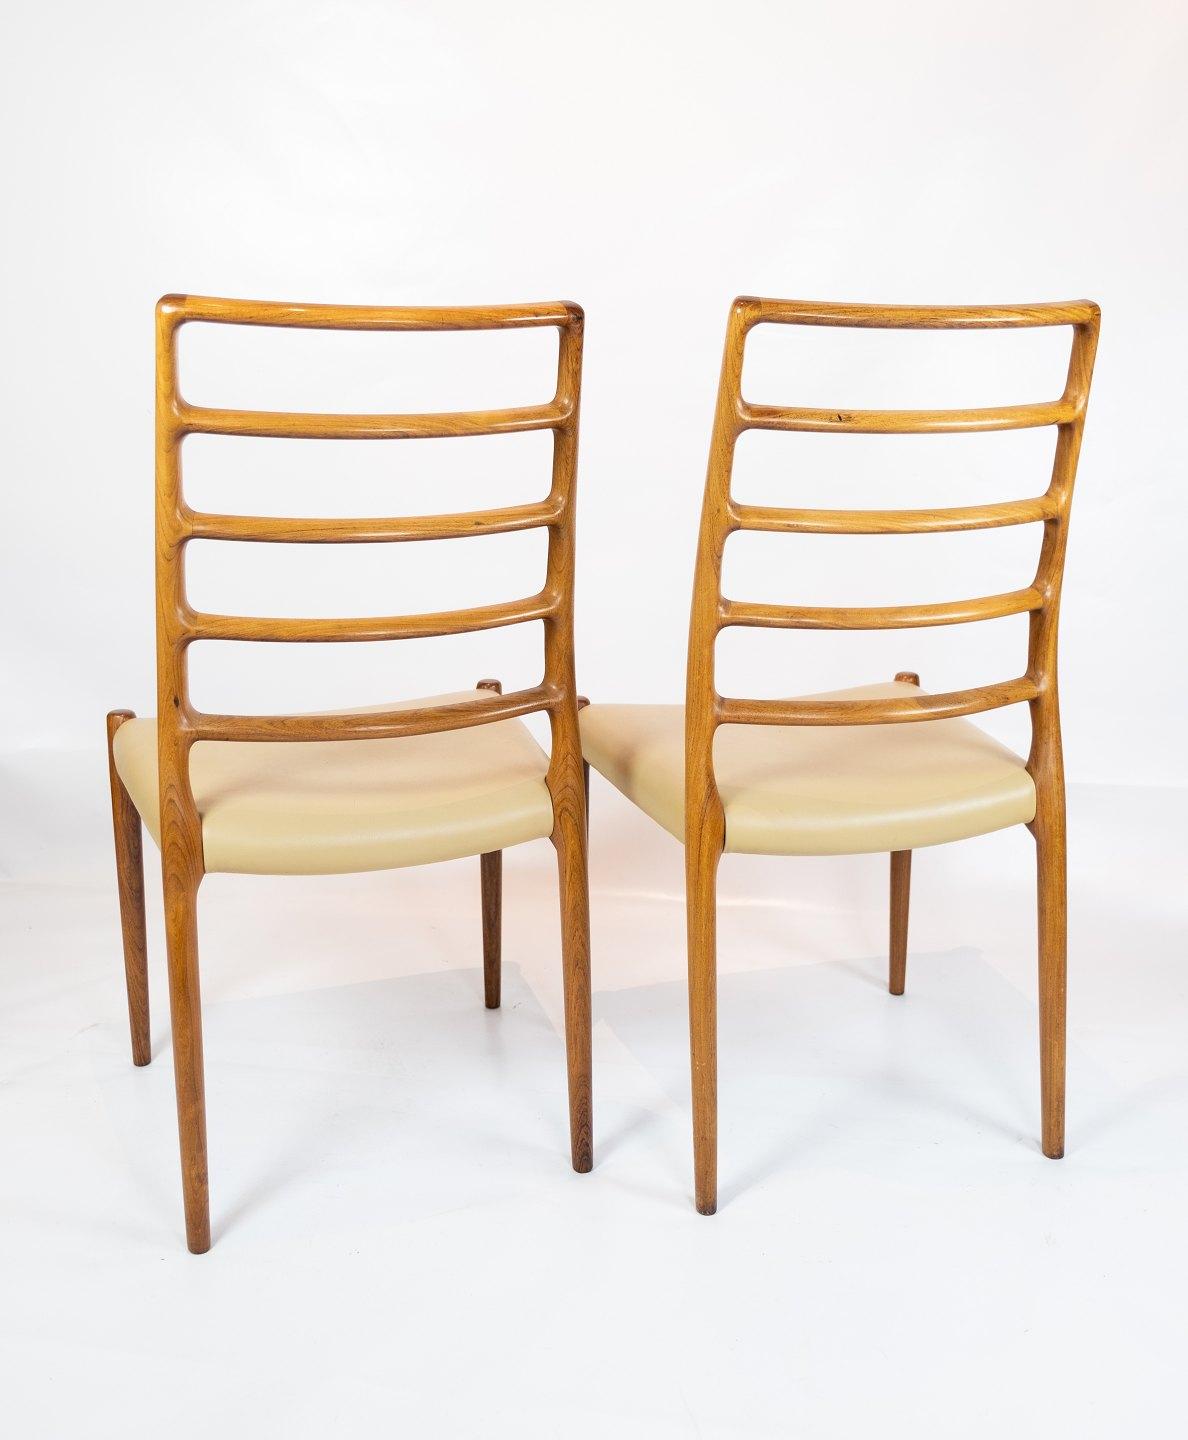 Rosewood Set of 8 Dining Chairs, Model 82, Designed by N.O. Møller from the 1960s